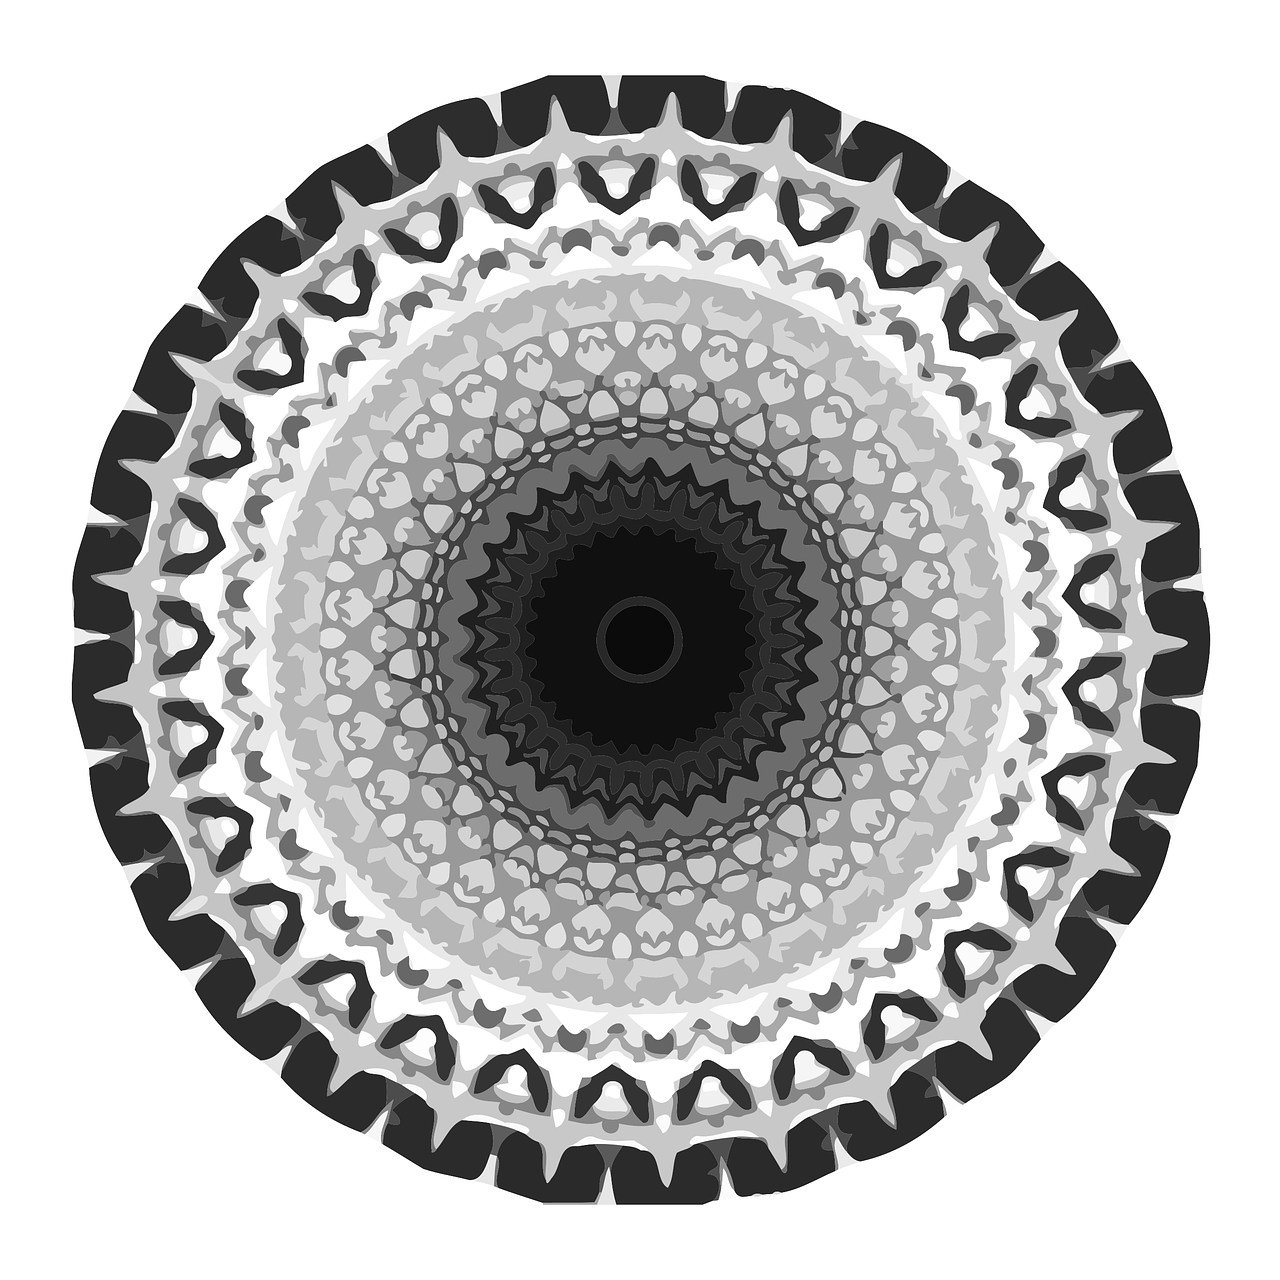 a black and white photo of a circular design, inspired by Benoit B. Mandelbrot, generative art, with gradients, lying on a mandala, bottom - view, gray scale